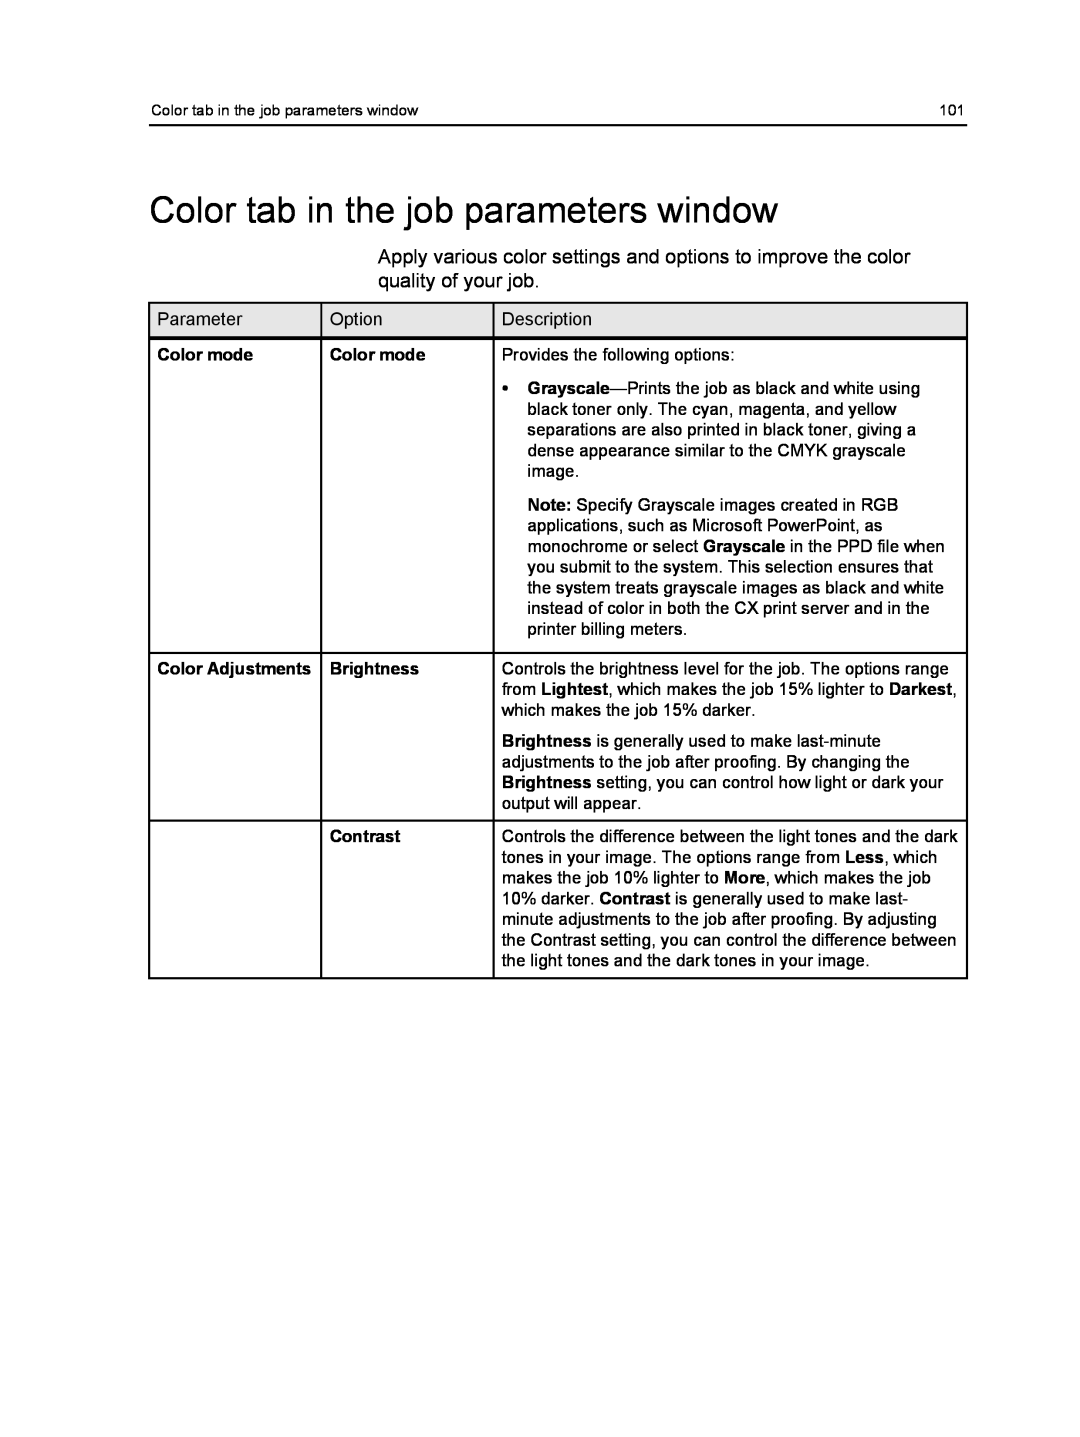 Xerox 550, 560 manual Color tab in the job parameters window, Color mode, Color Adjustments, Brightness, Contrast 